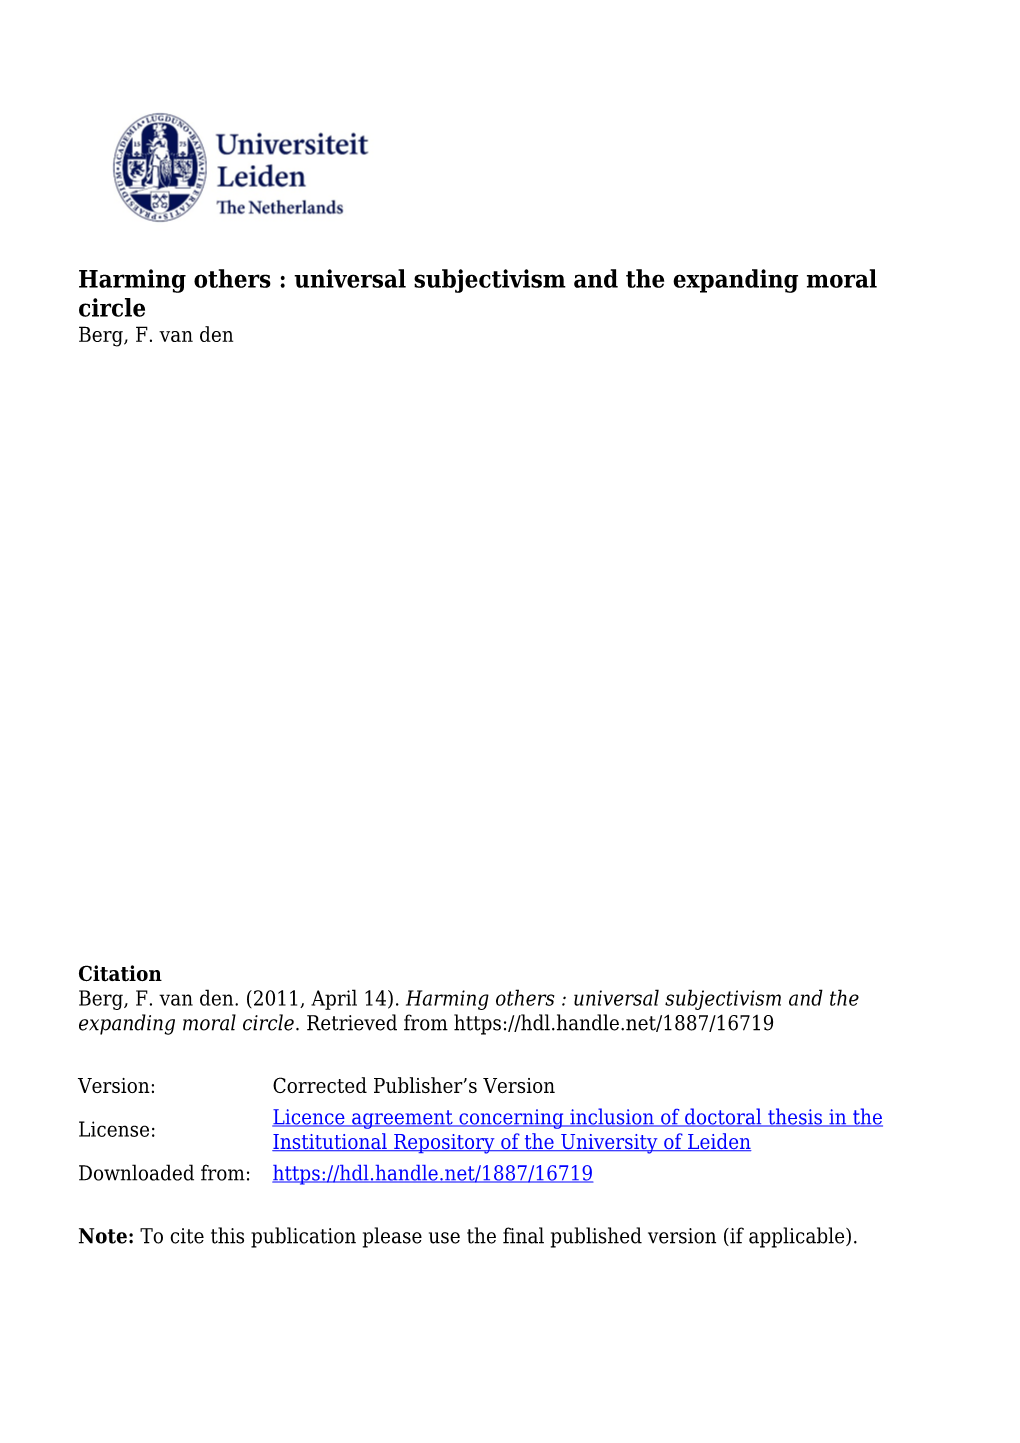 Harming Others: Universal Subjectivism and the Expanding